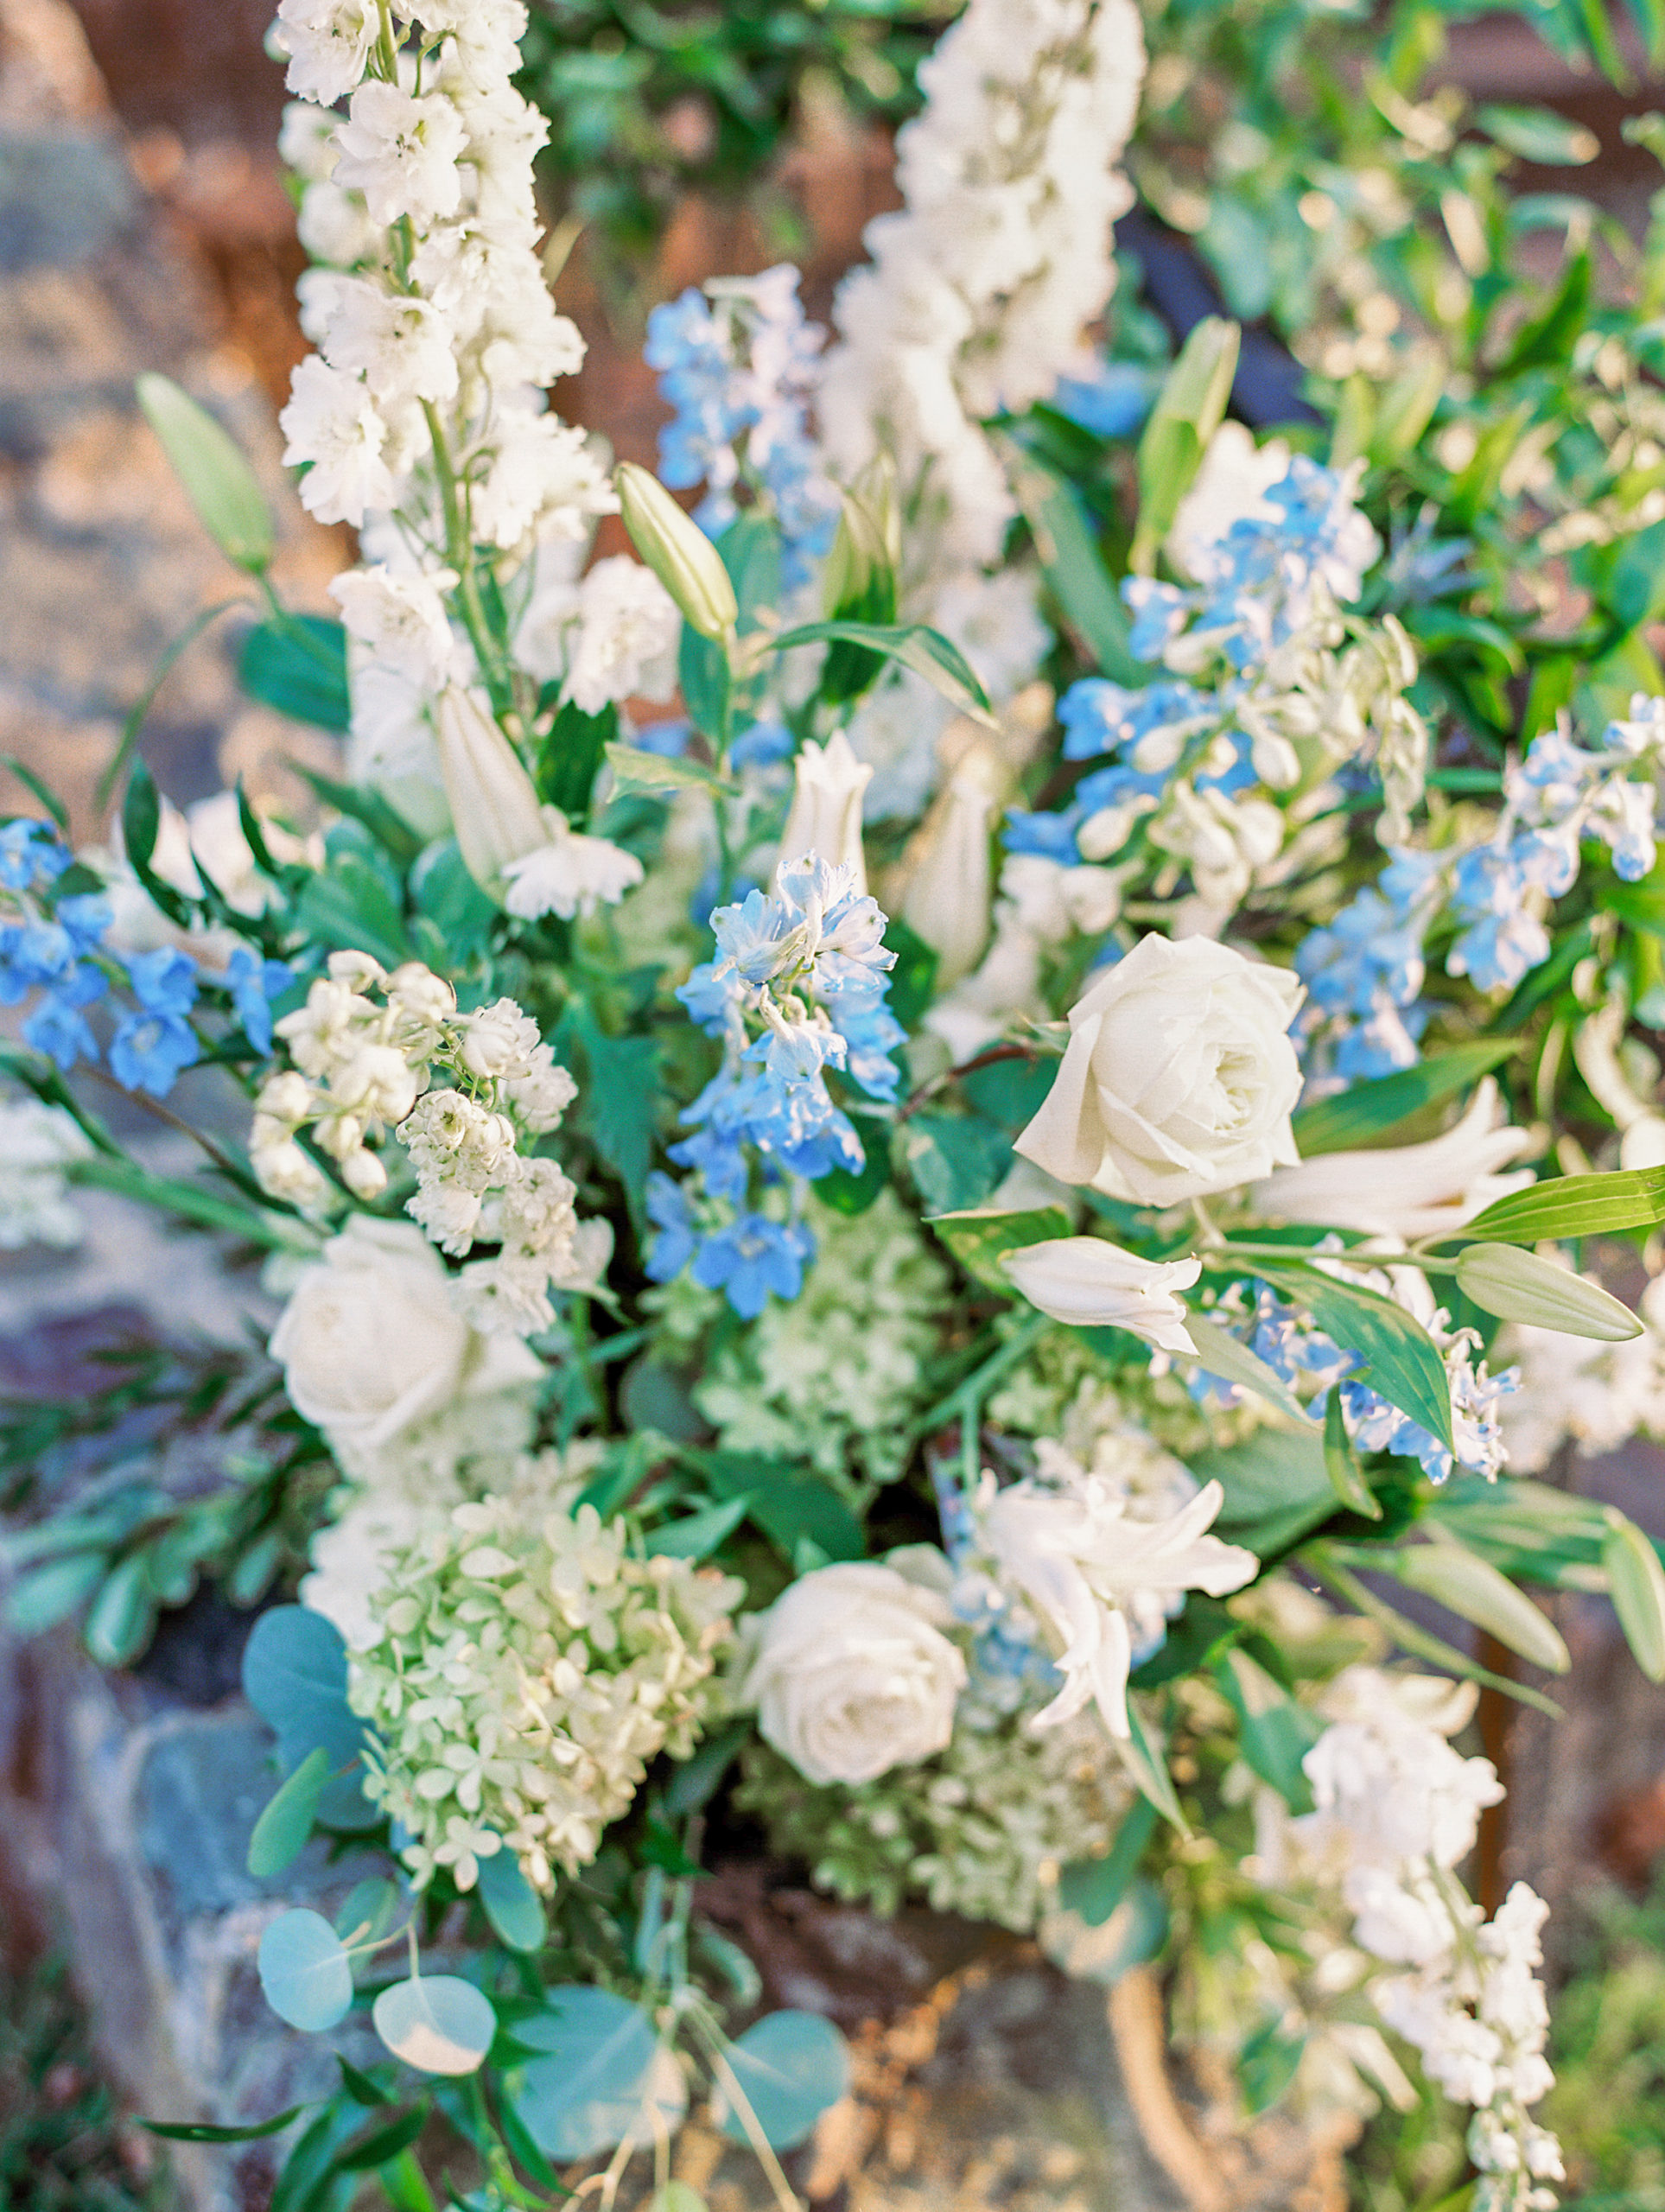 Up close view of blue and white flower arrangement 